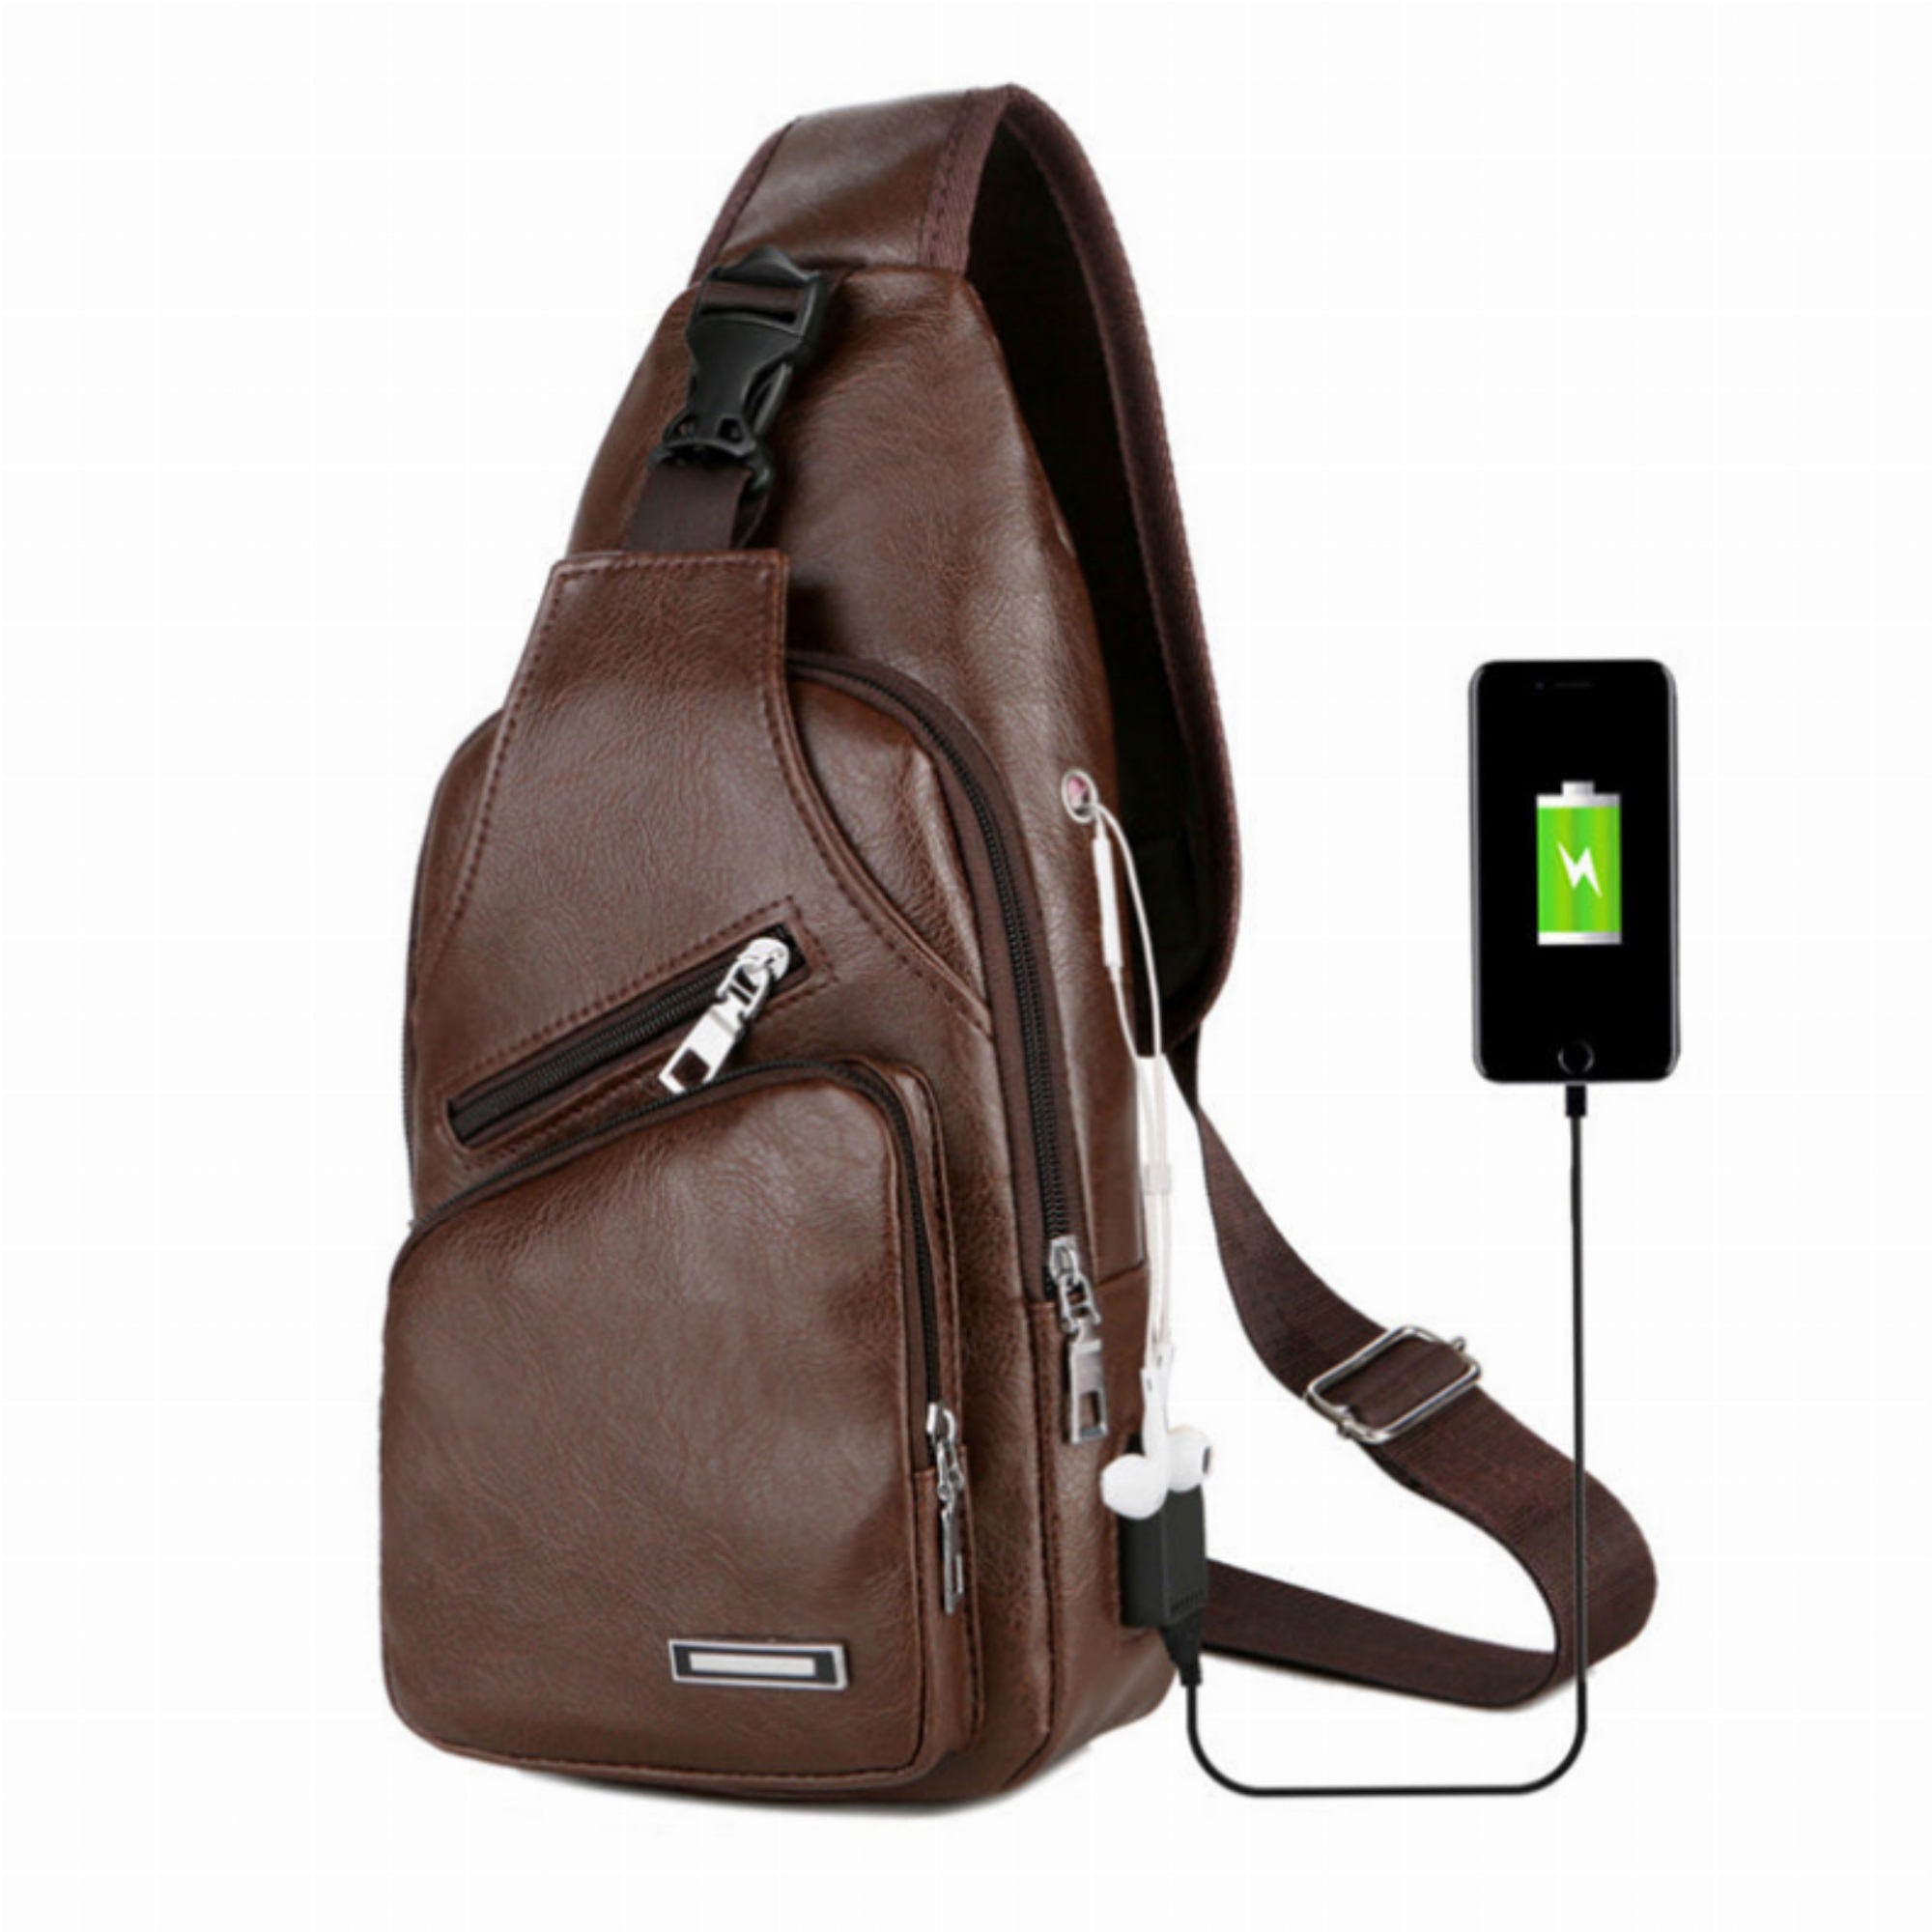 Campus Buddy Sling Bag With 3 In 1 Access by VistaShops - image 1 of 2